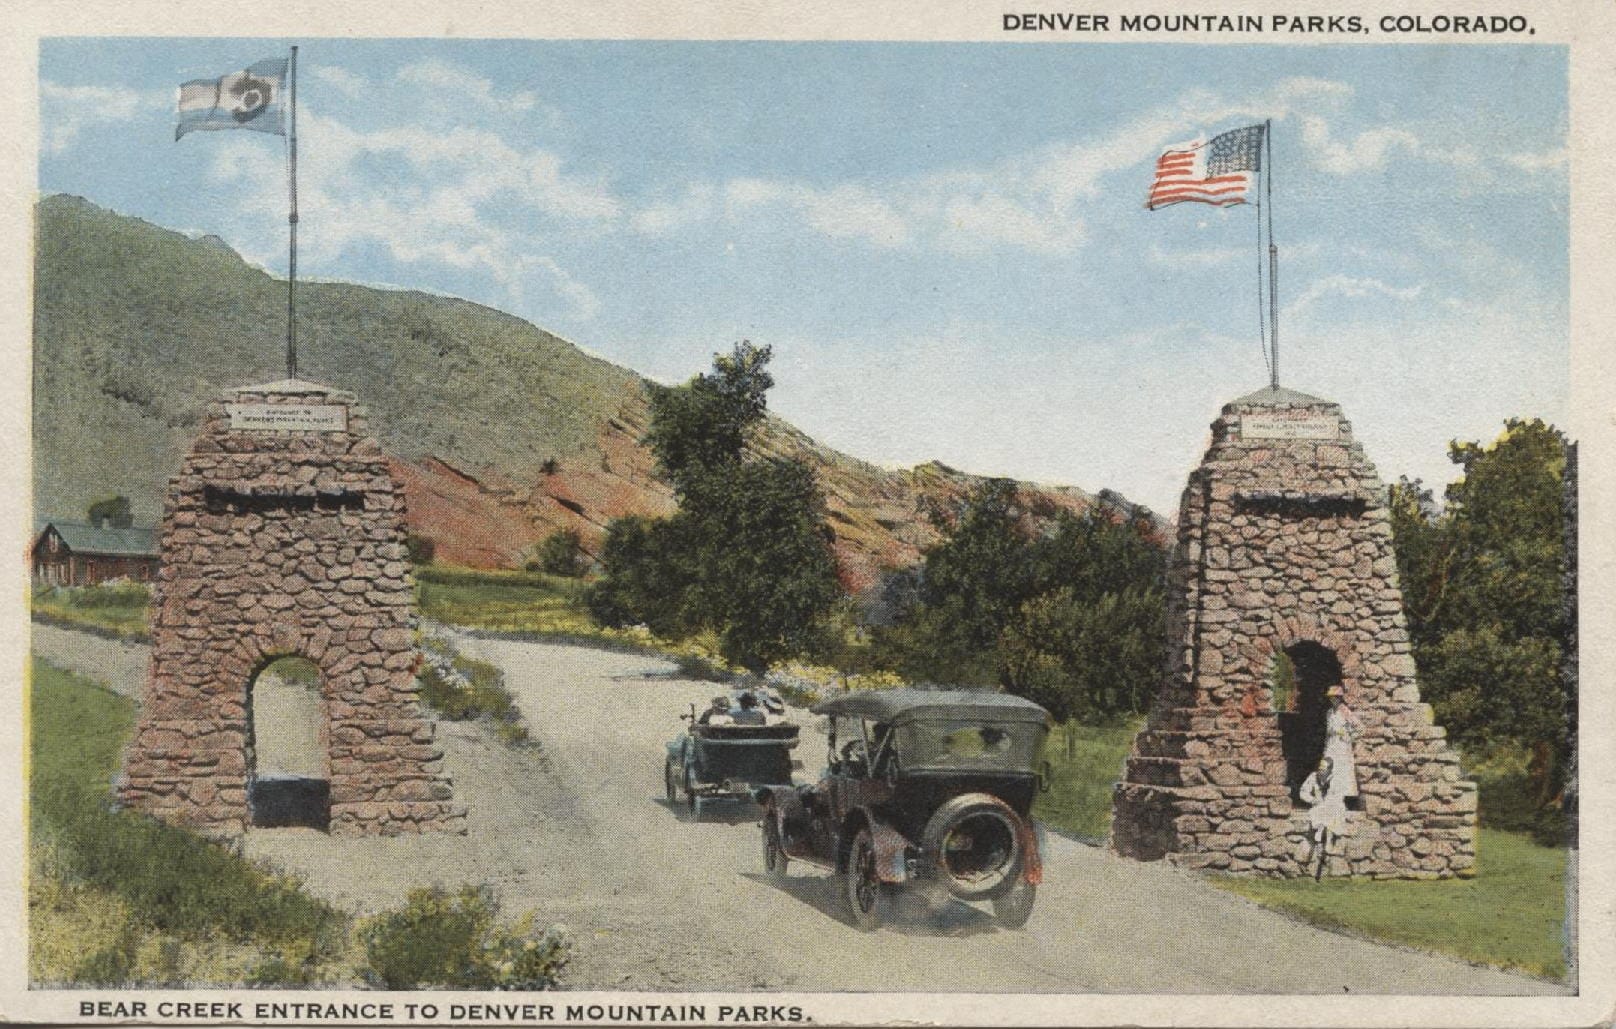 hand-tinted postcard showing two stone pillars with American and Colorado flags, two 1920s cars, and two girls